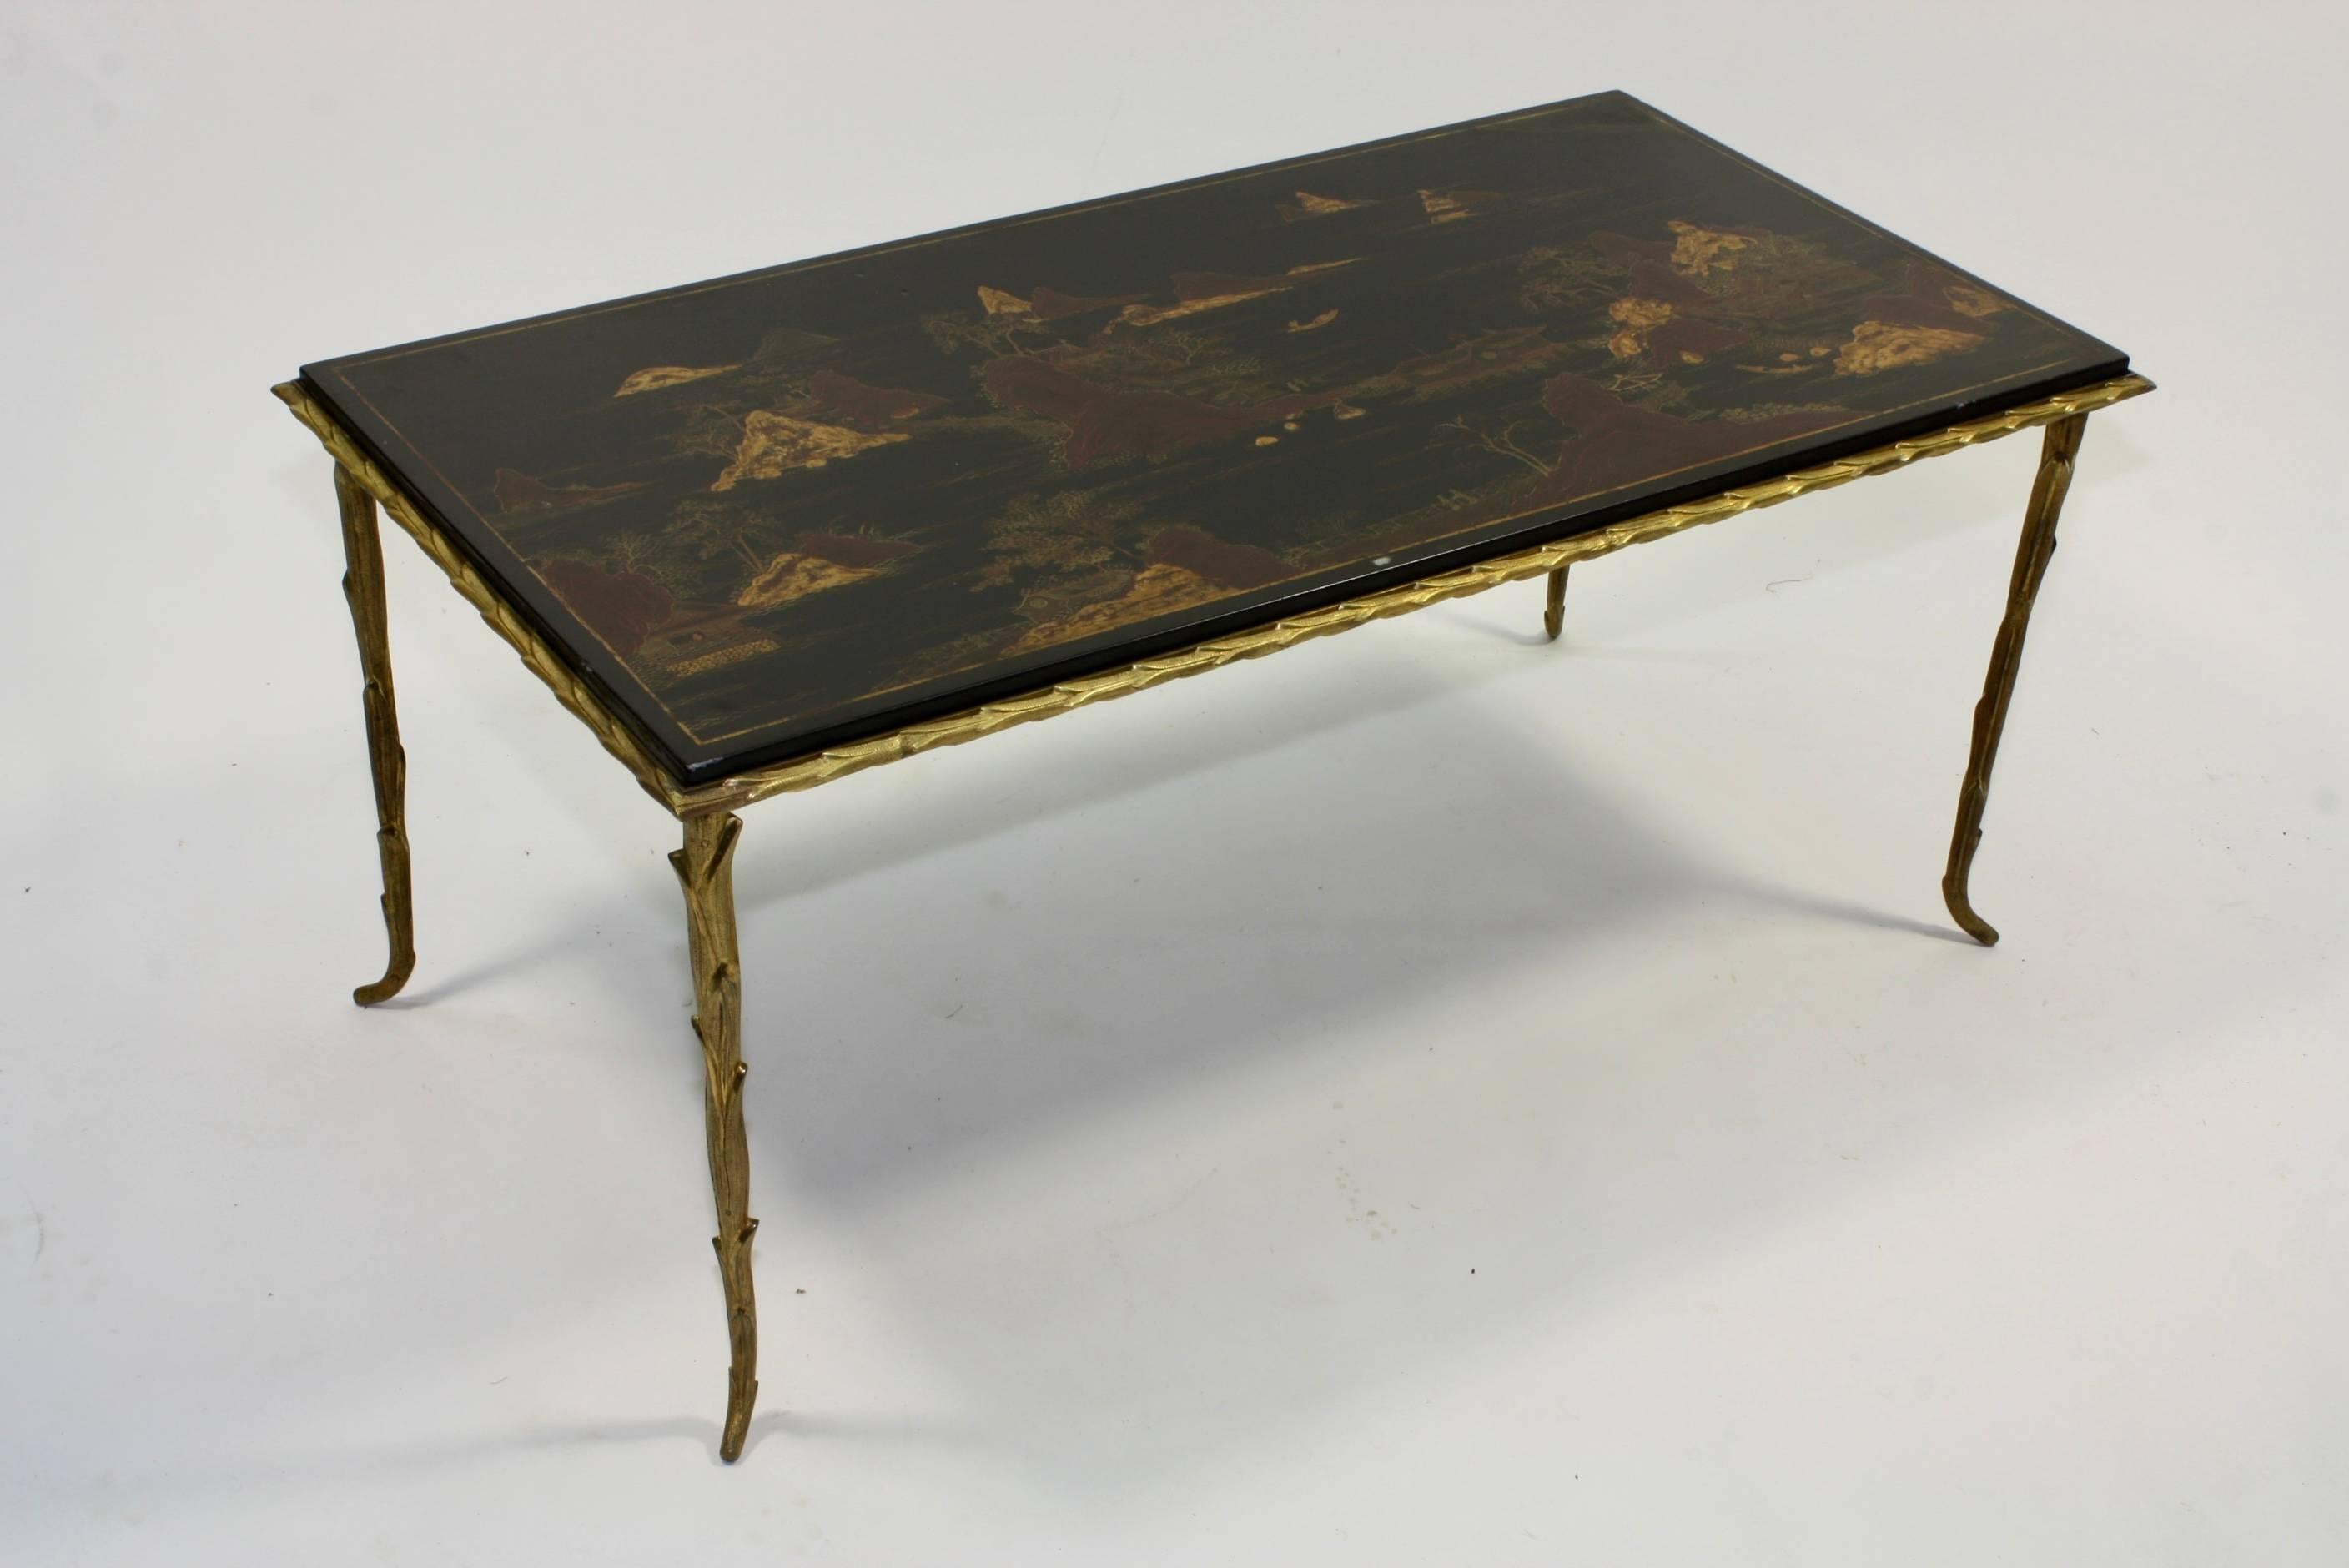 French black lacquered and japanned coffee table with gilt bronze mounts, acanthus detailing (Maison Baguès, mid-20th century).